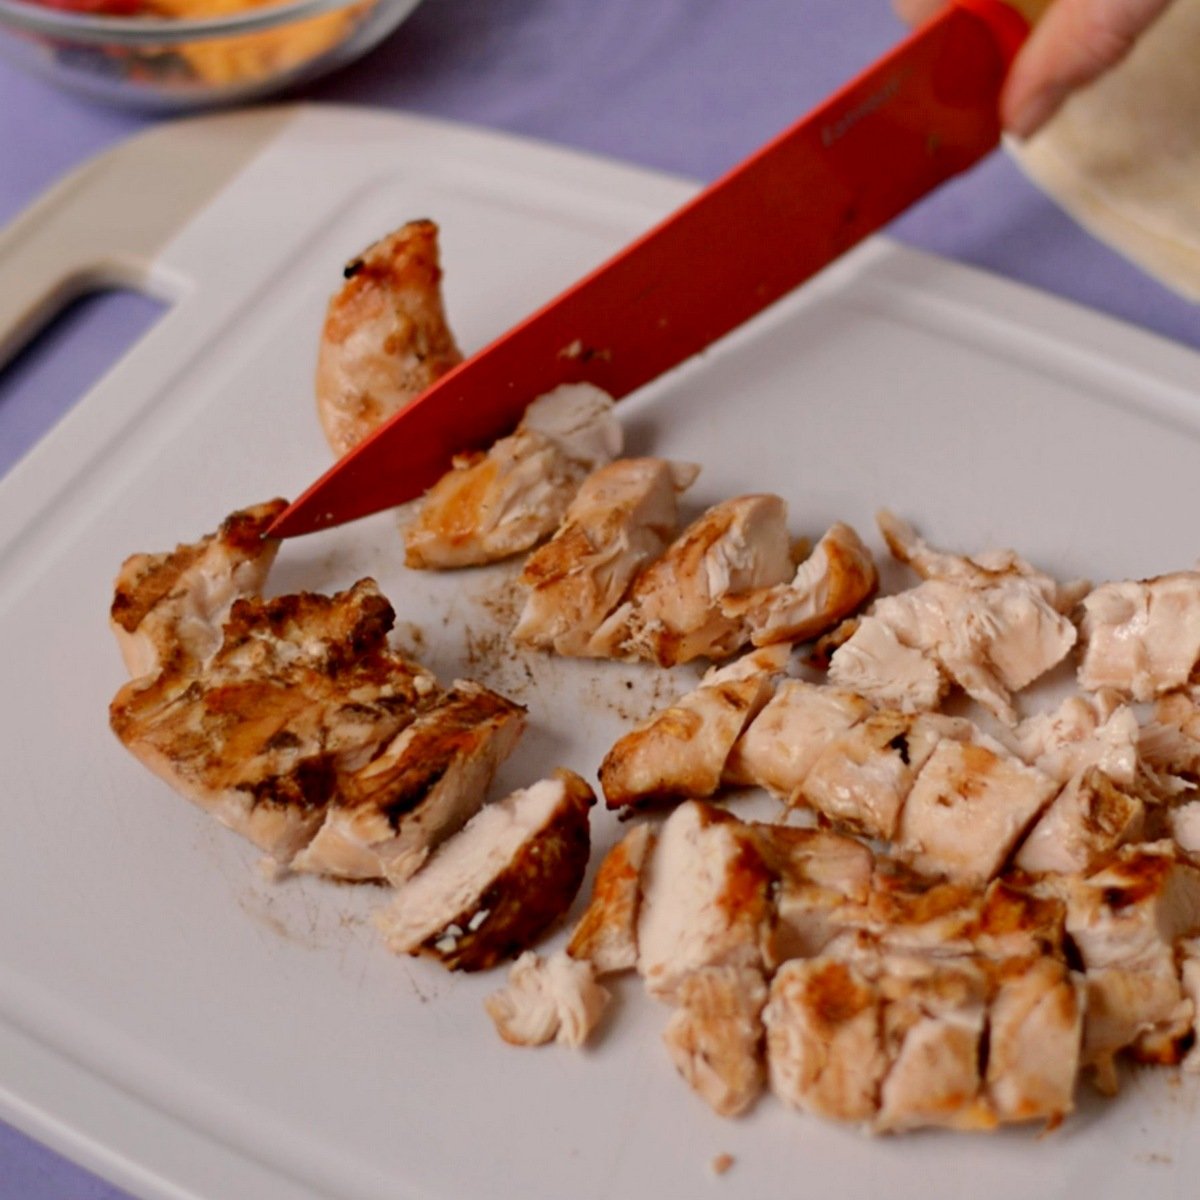 Knife chopping up grilled chicken.